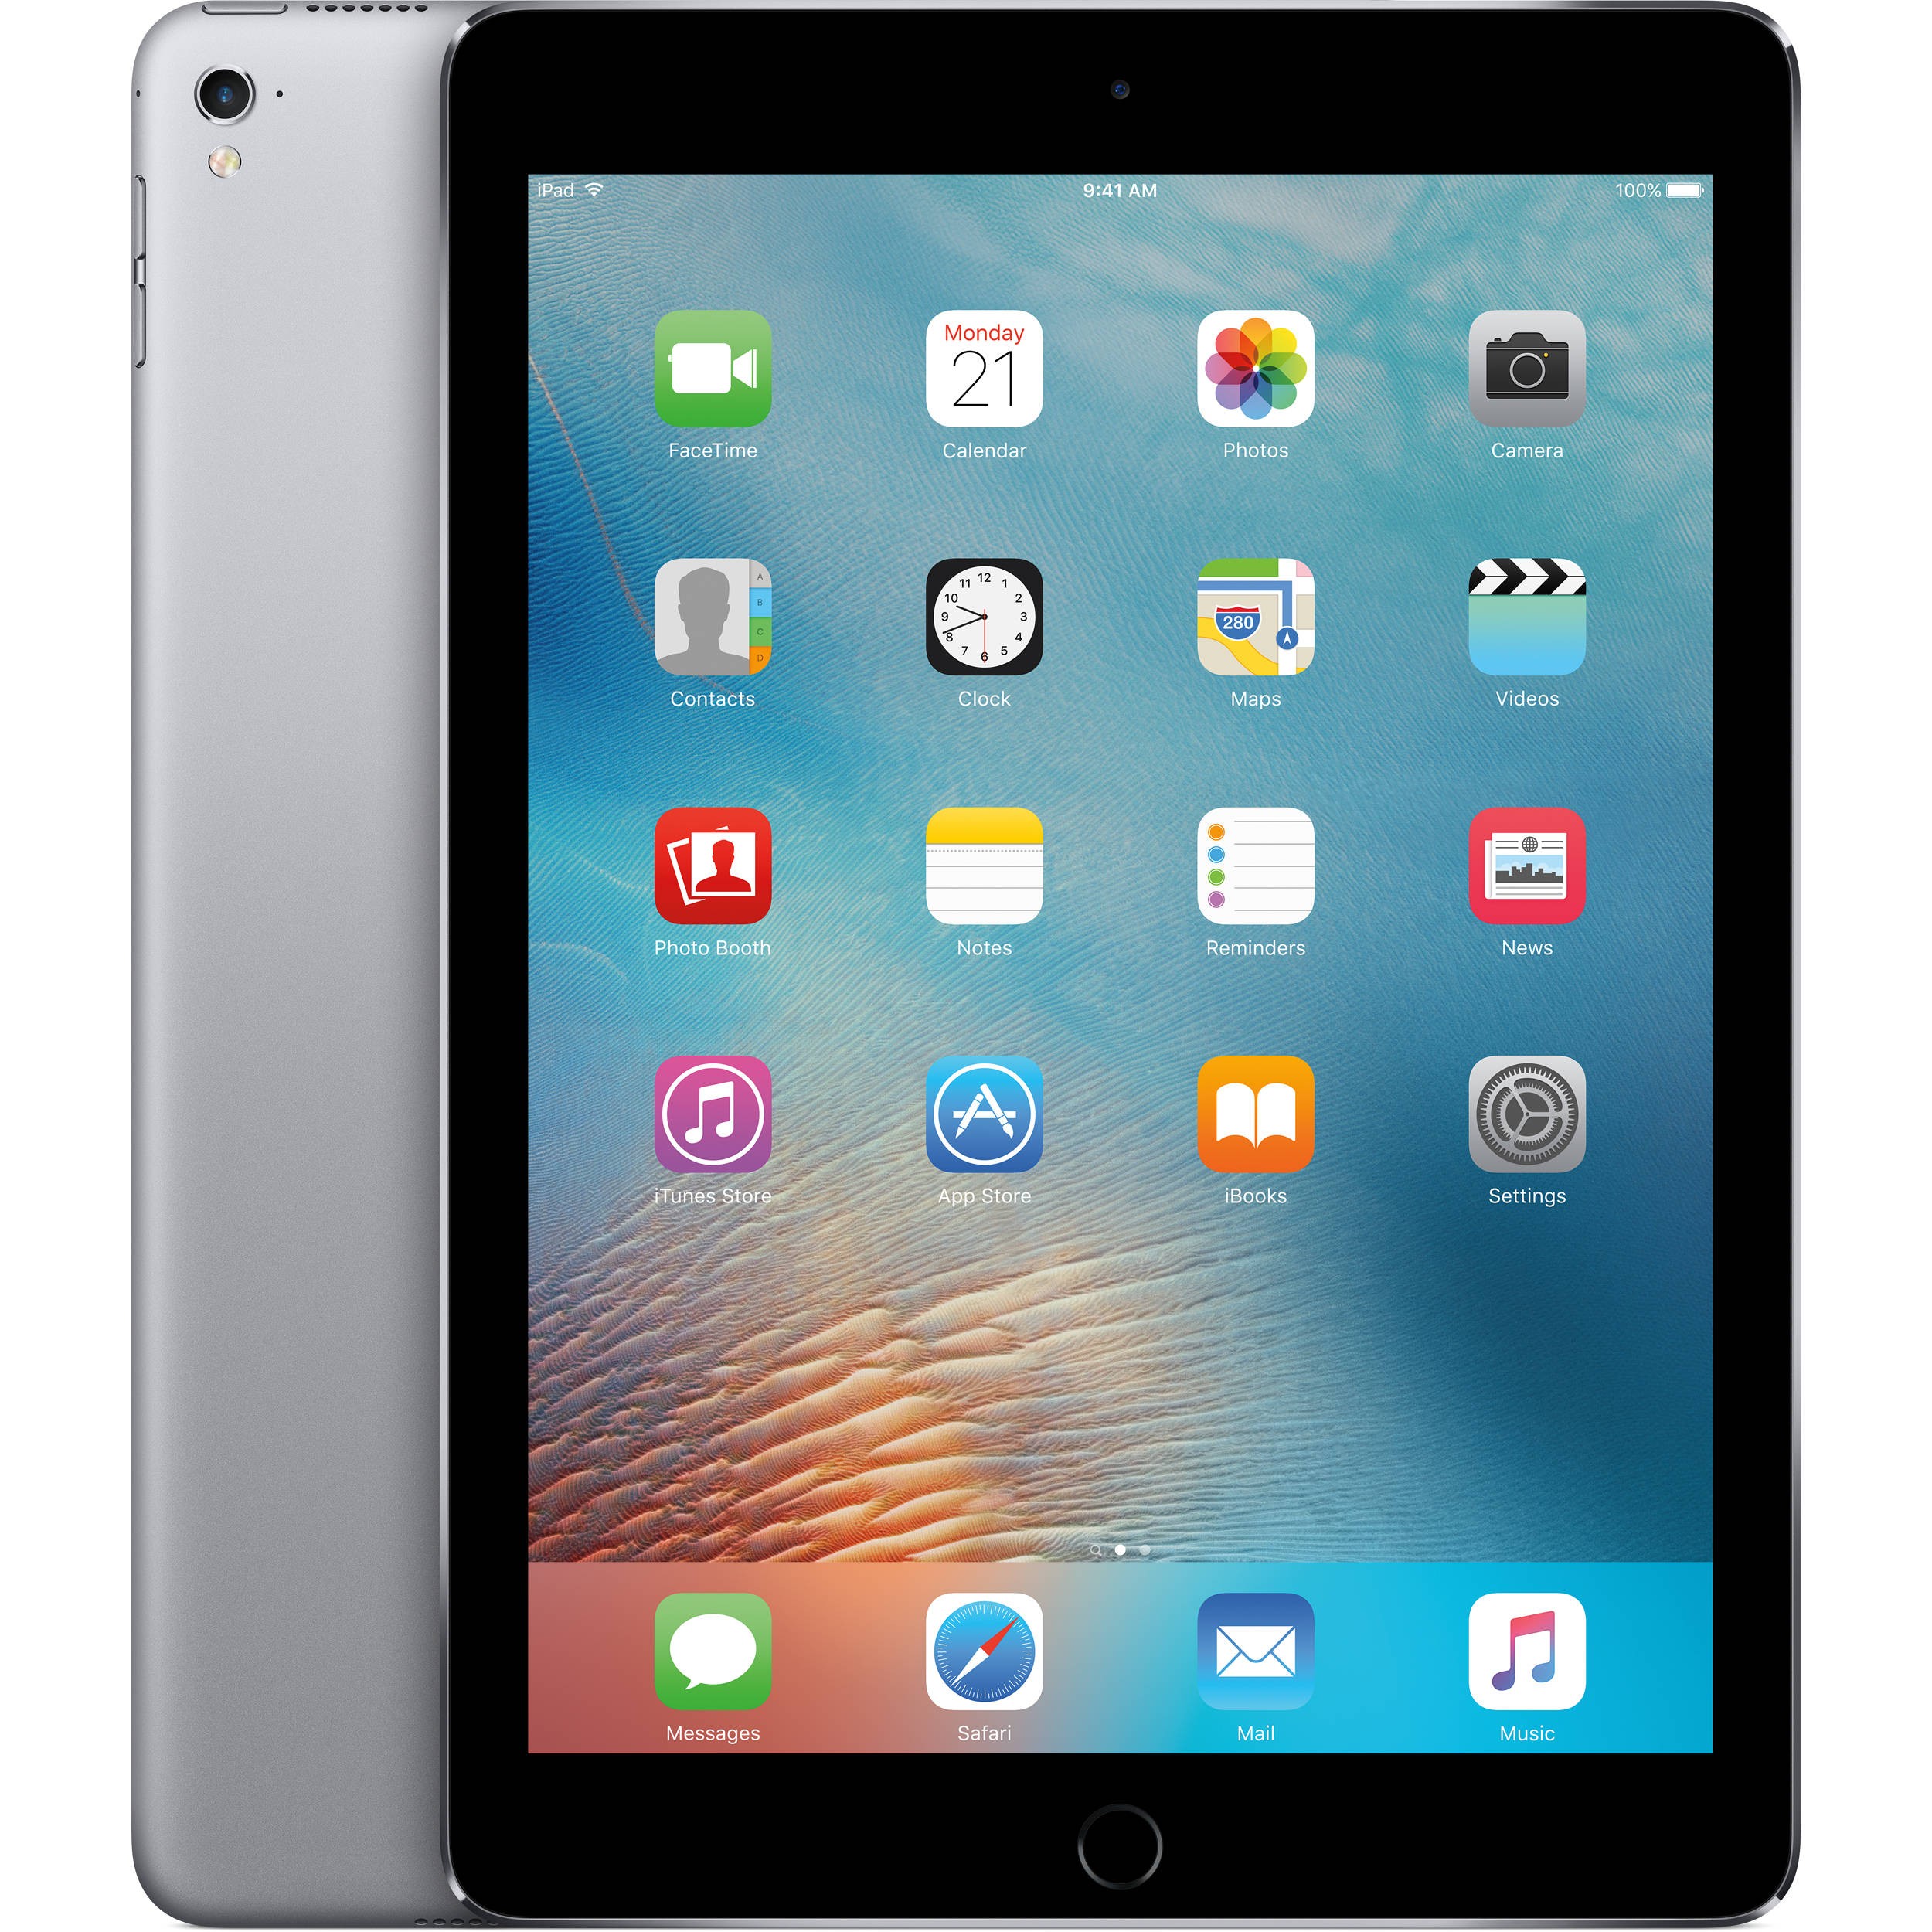 Apple iPad Pro 12.9-inch, Wi-Fi Only, Space Gray 128gb (Scratch and Dent) - image 1 of 4